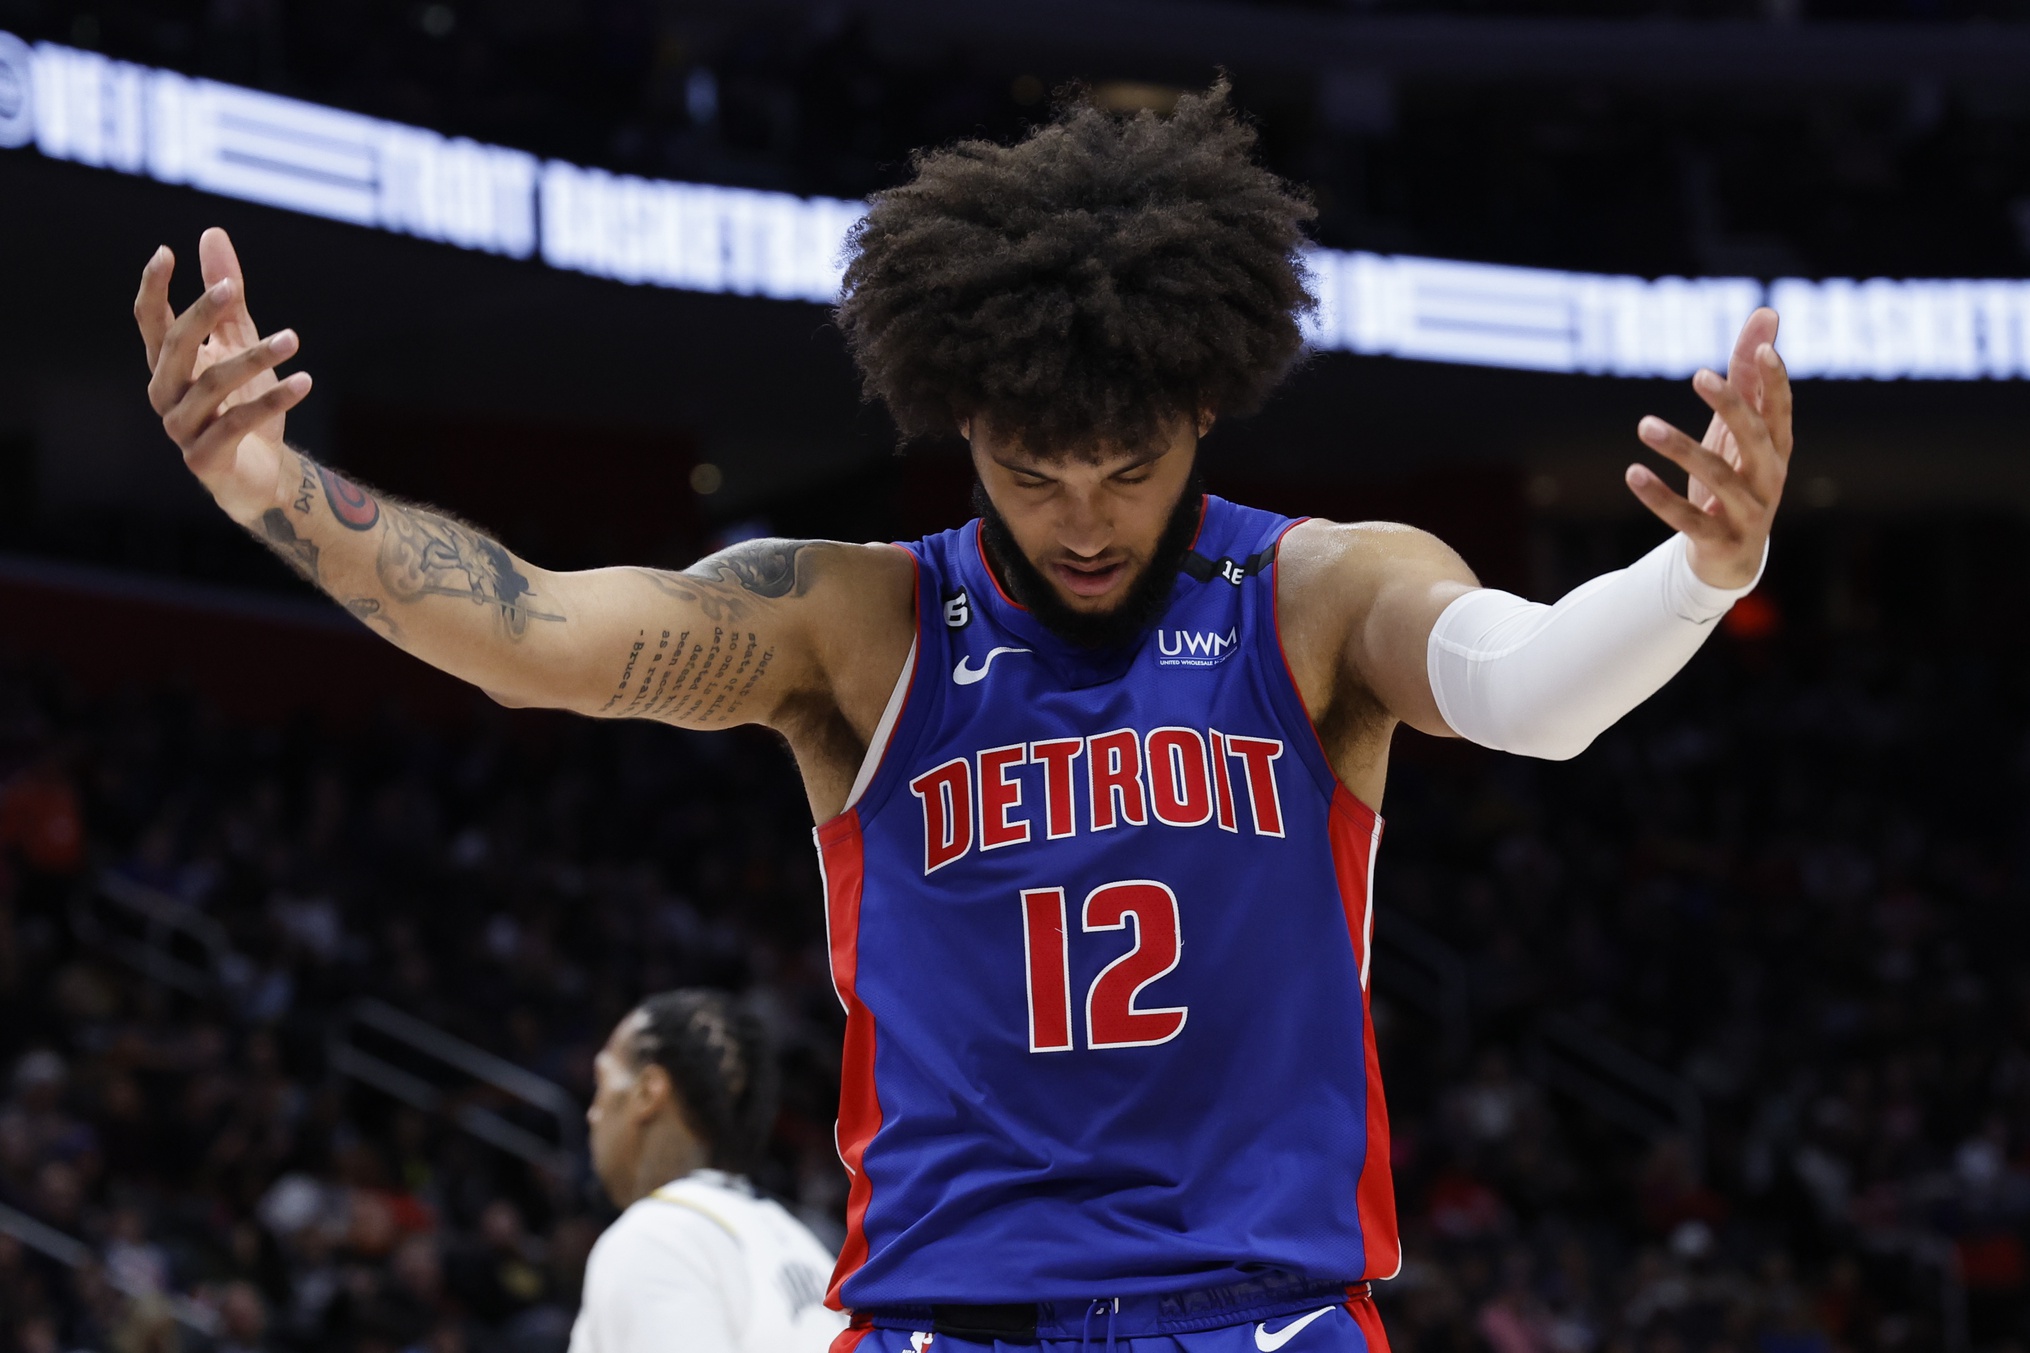 Detroit Pistons: Understanding what transpired at the 2019 Draft